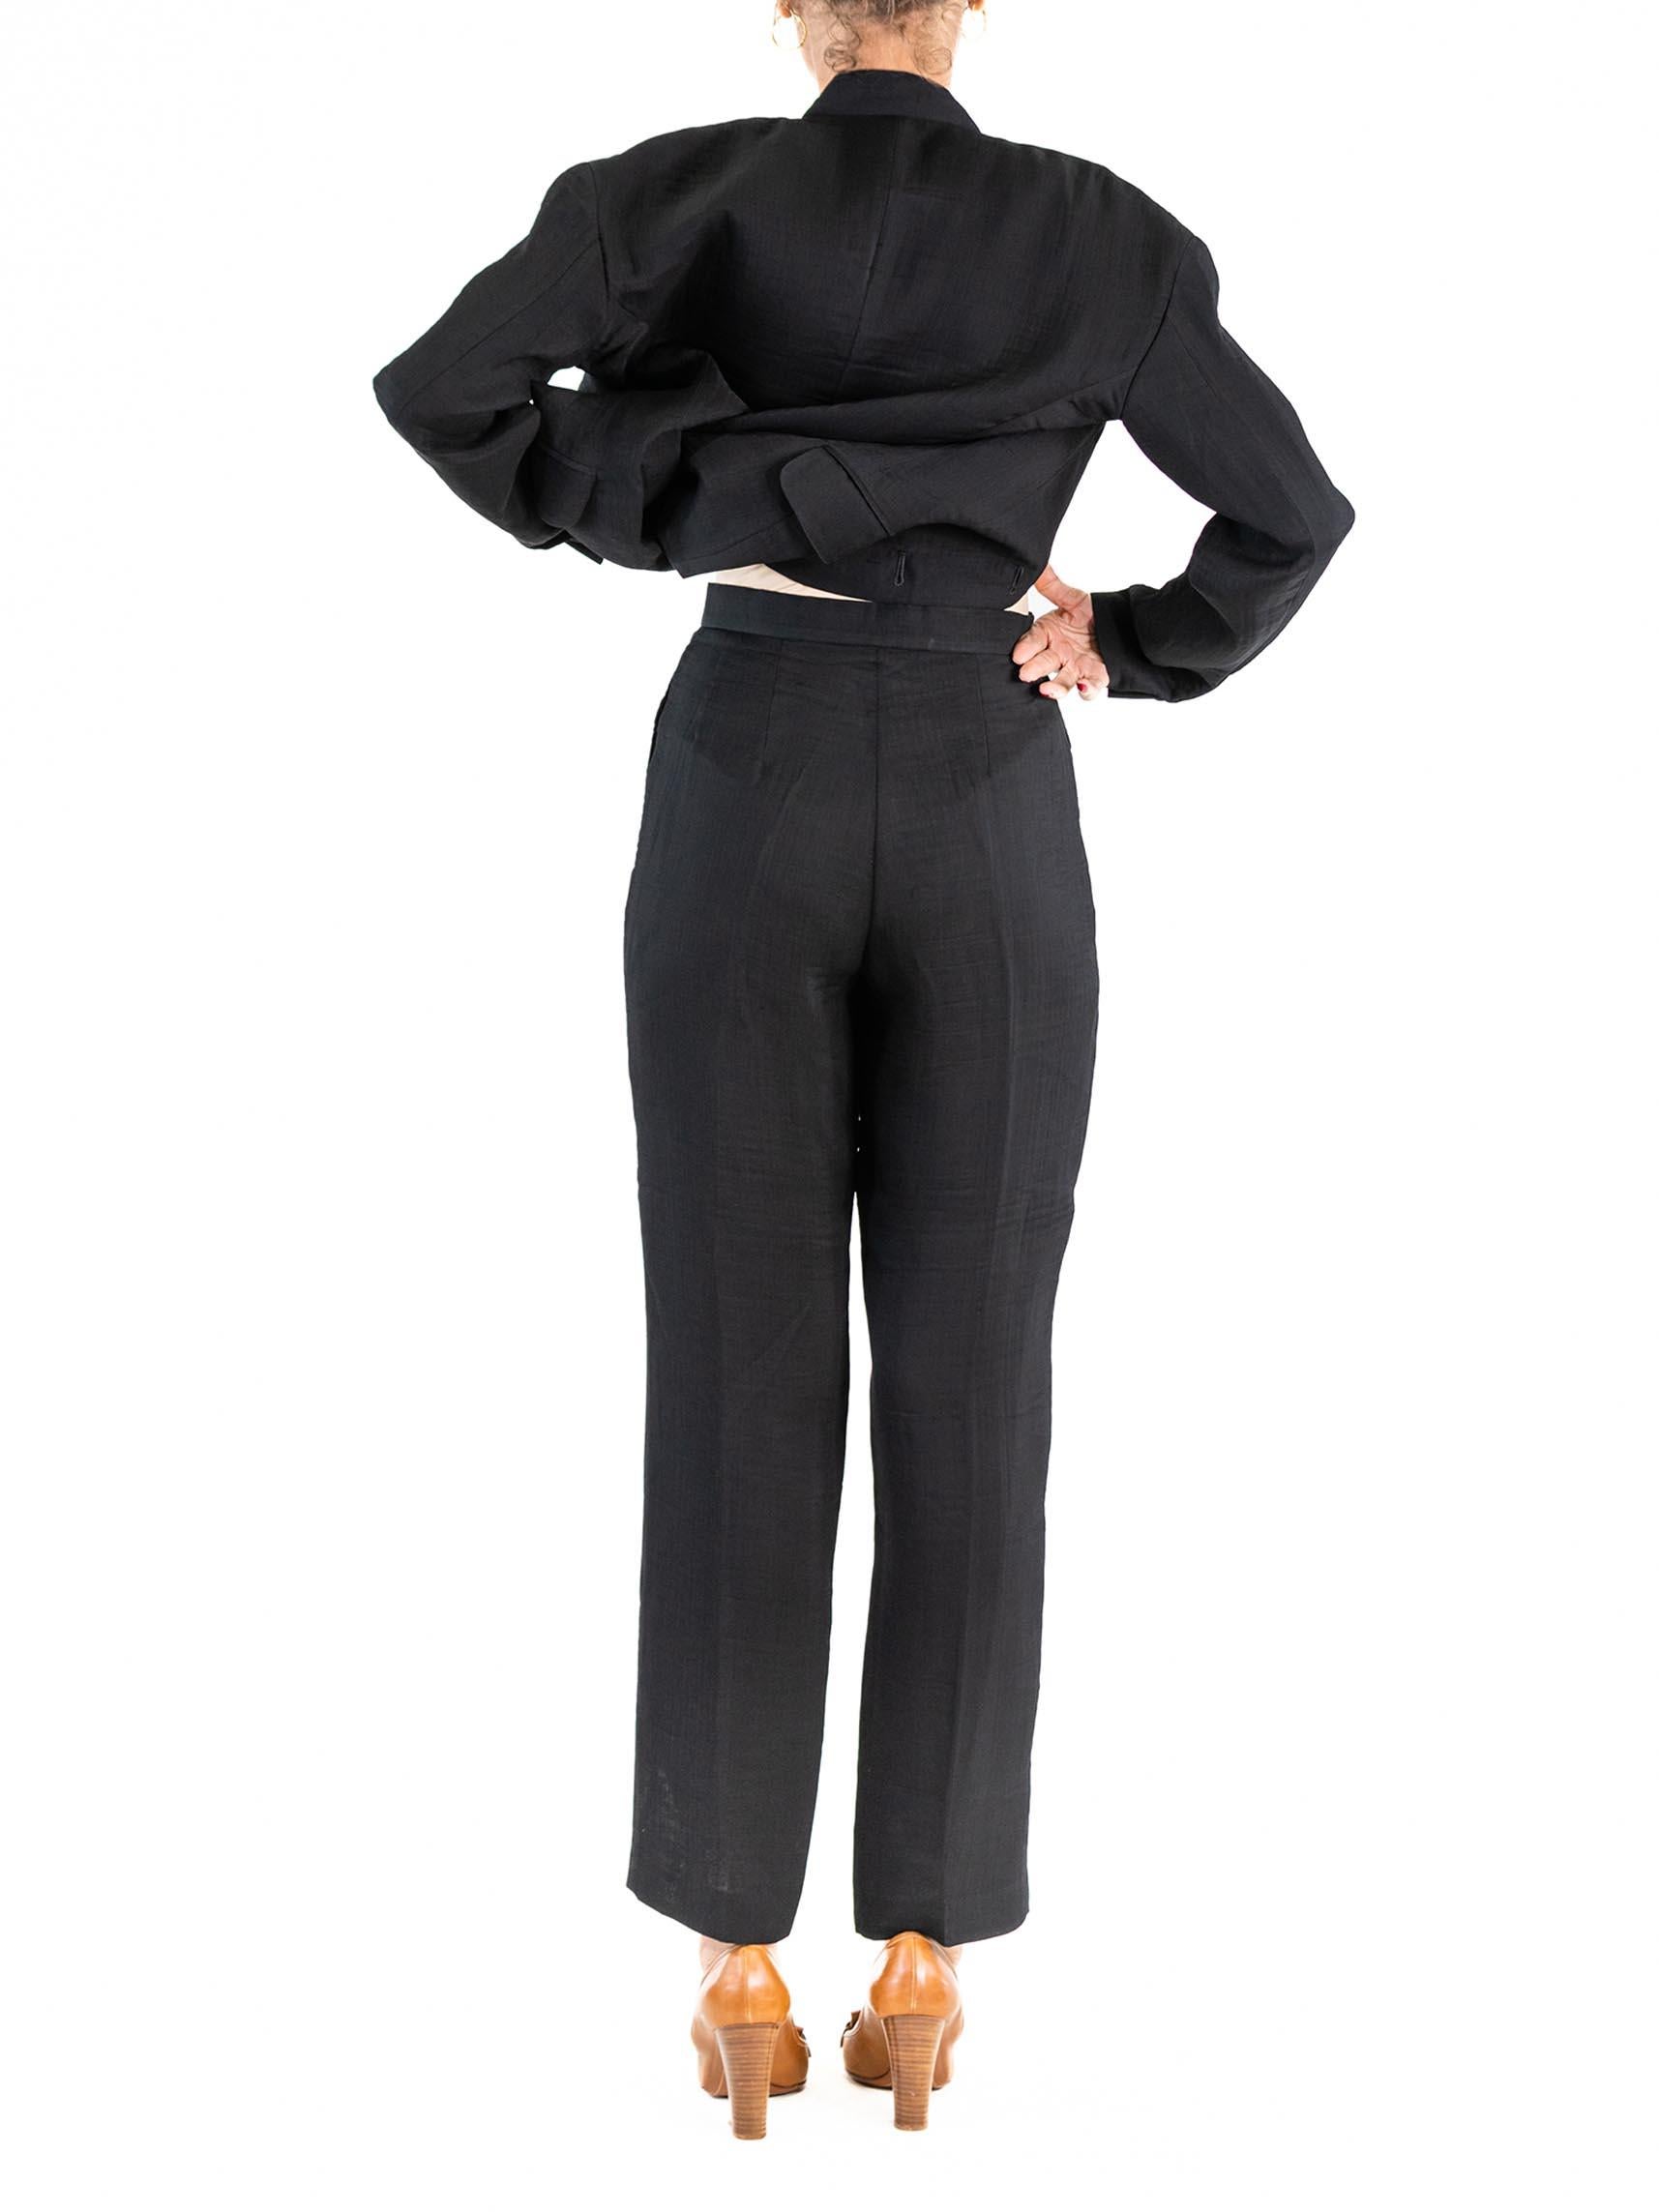 1990S ISSEY MIYAKE Black Rayon Blend Lightweight Pucker Double-Weave Pant Suit For Sale 5